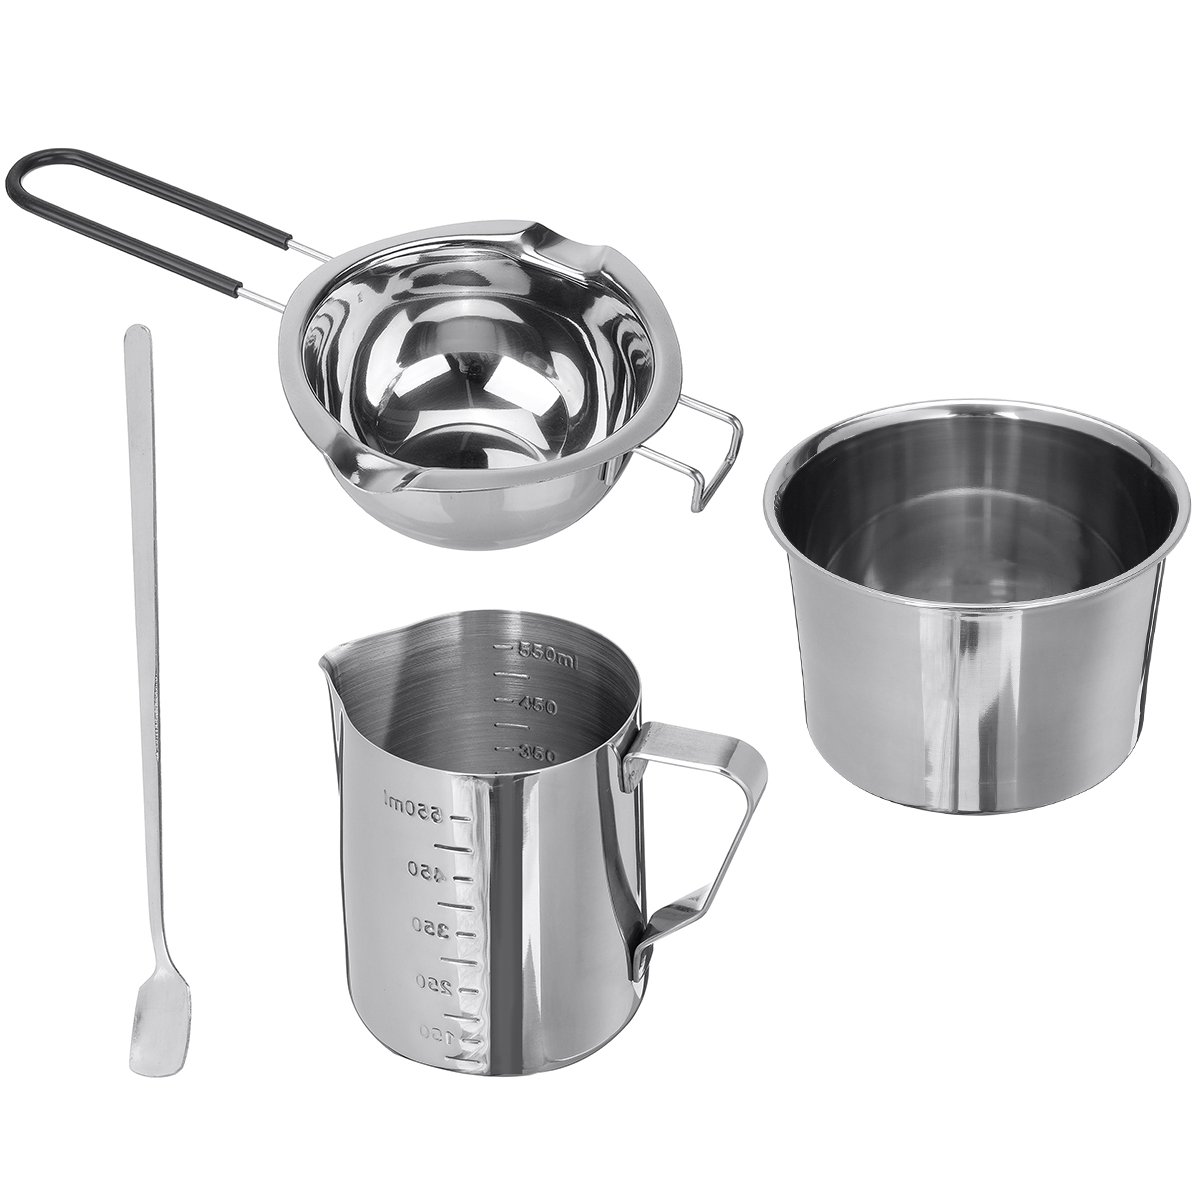 Candle-Making-Tool-DIY-Candle-Material-Stainless-Steel-Wax-Pot-Scale-Wax-Cup-Set-1816137-2